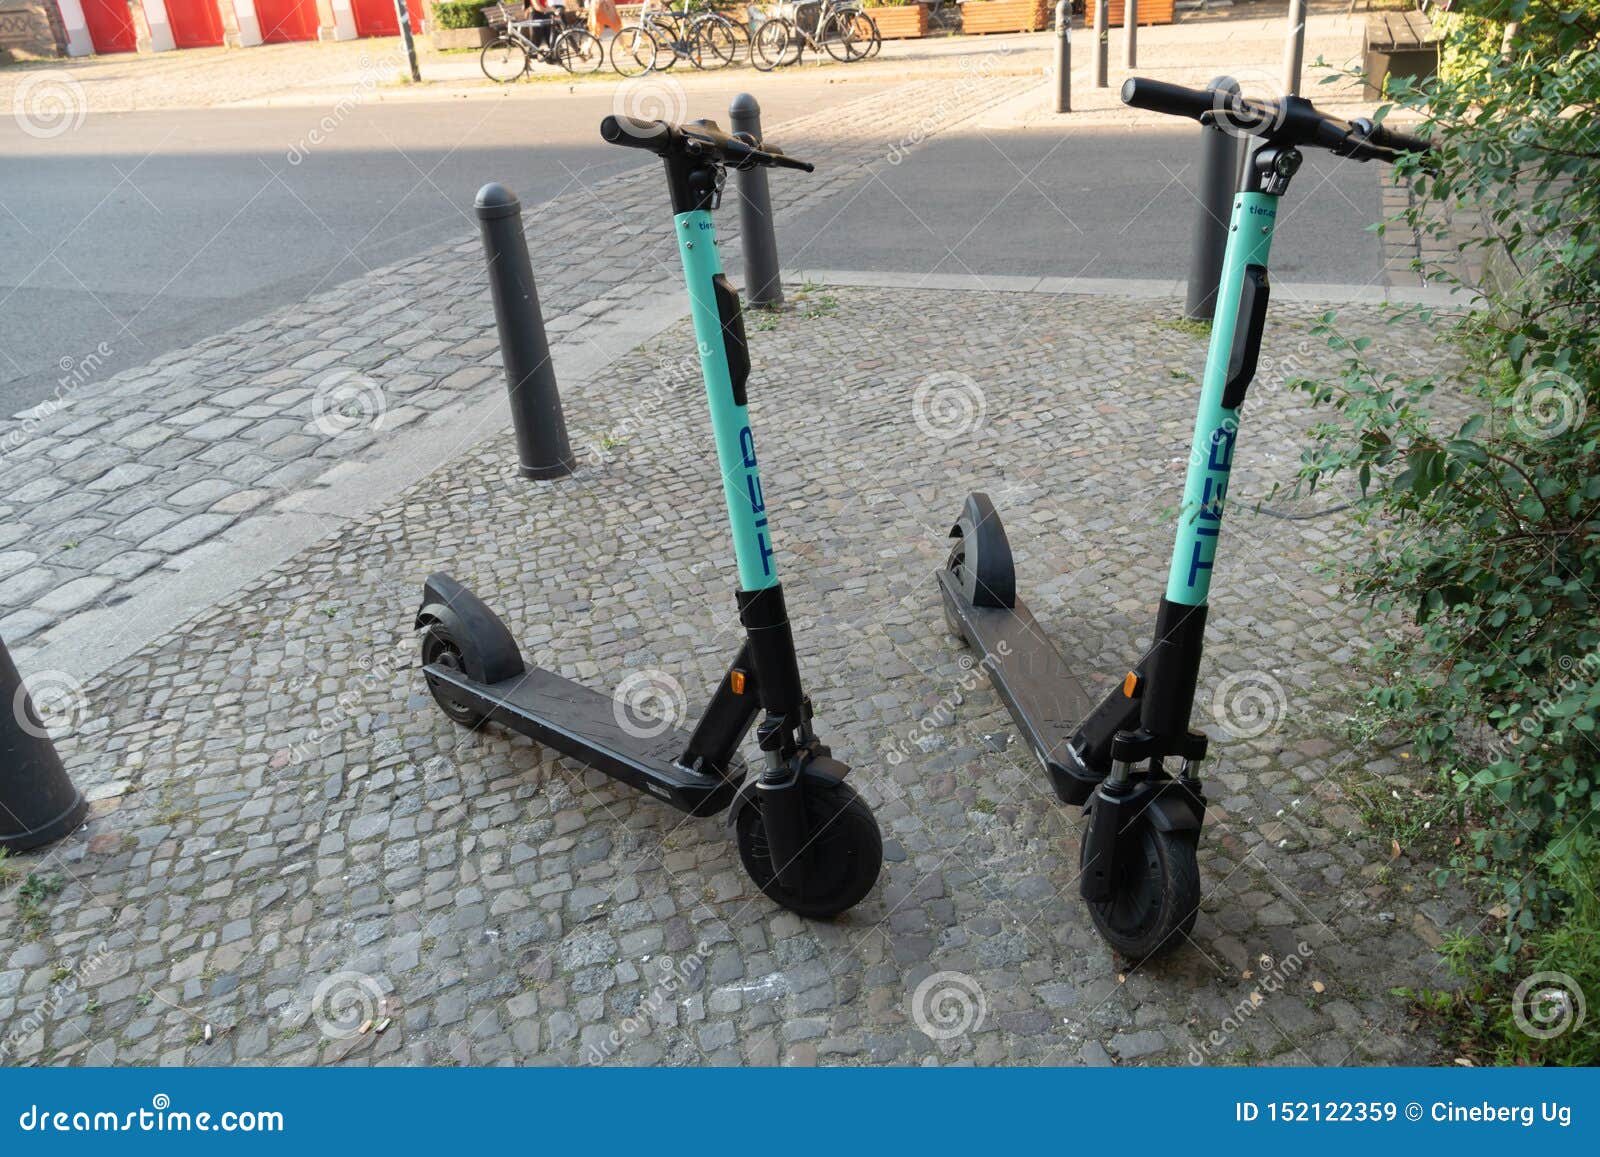 Mobility Electric Scooter Editorial Stock Image - Image of brand, company: 152122359